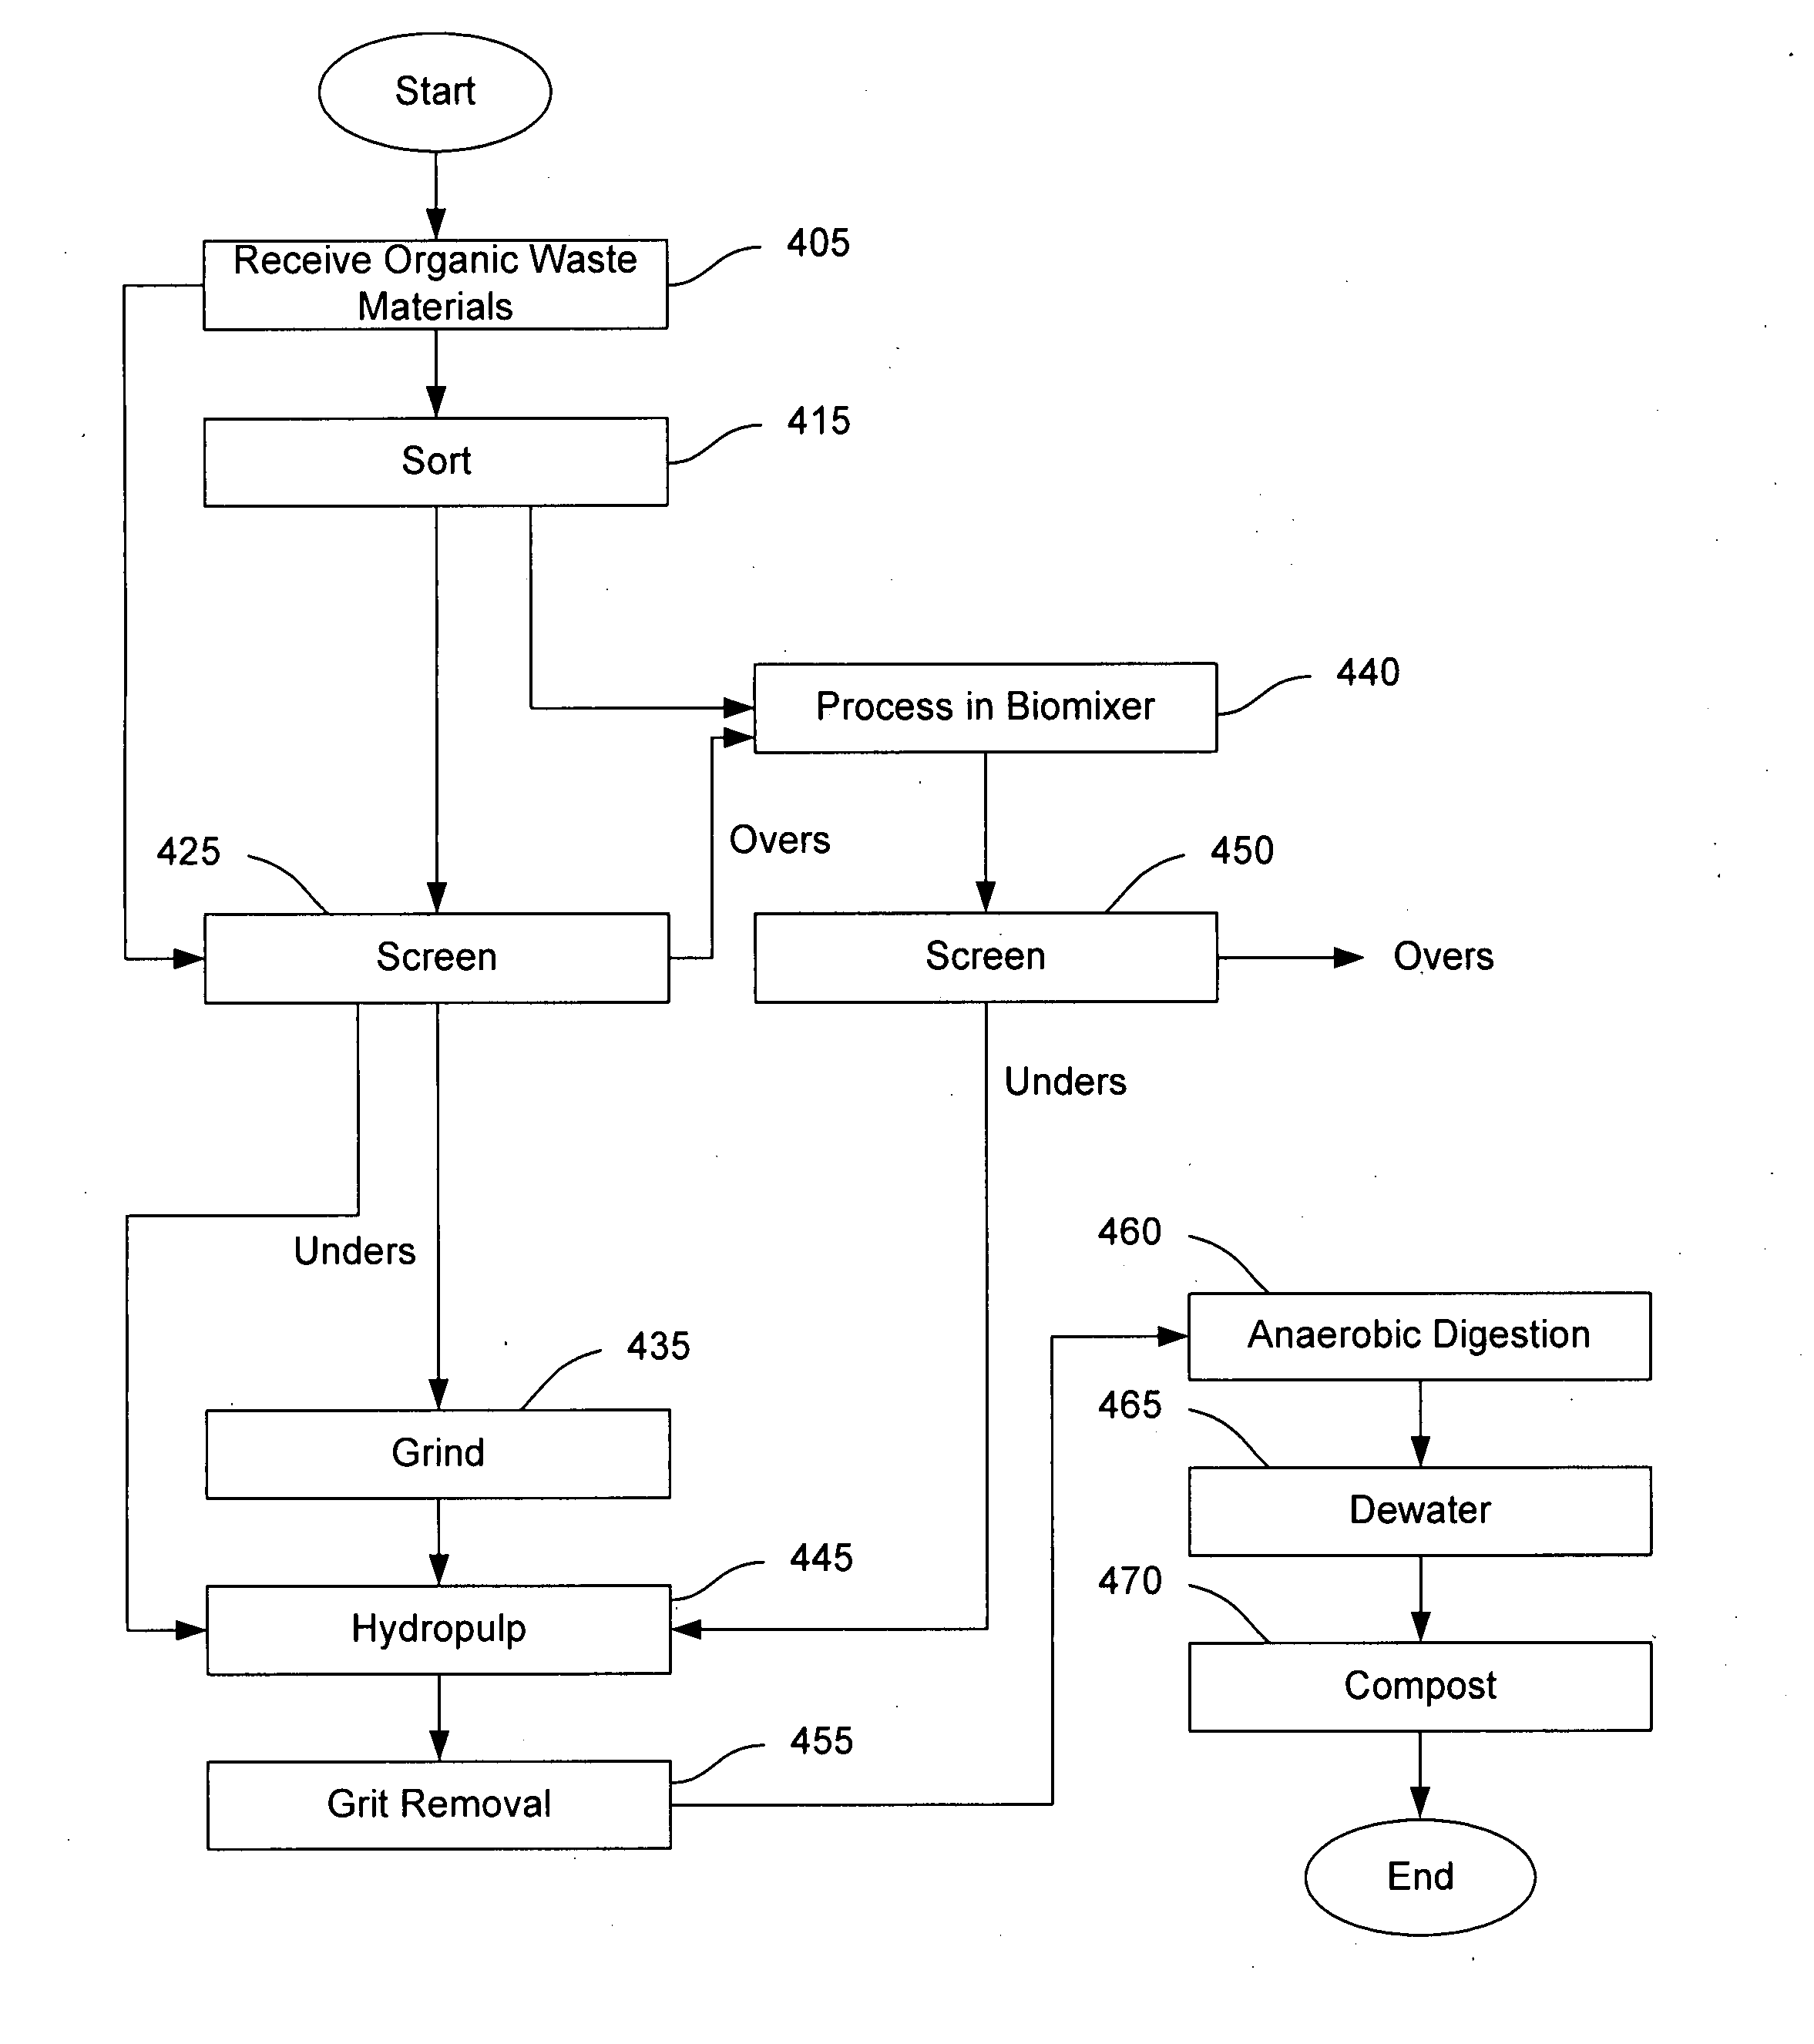 Systems and methods for converting organic waste materials into useful products